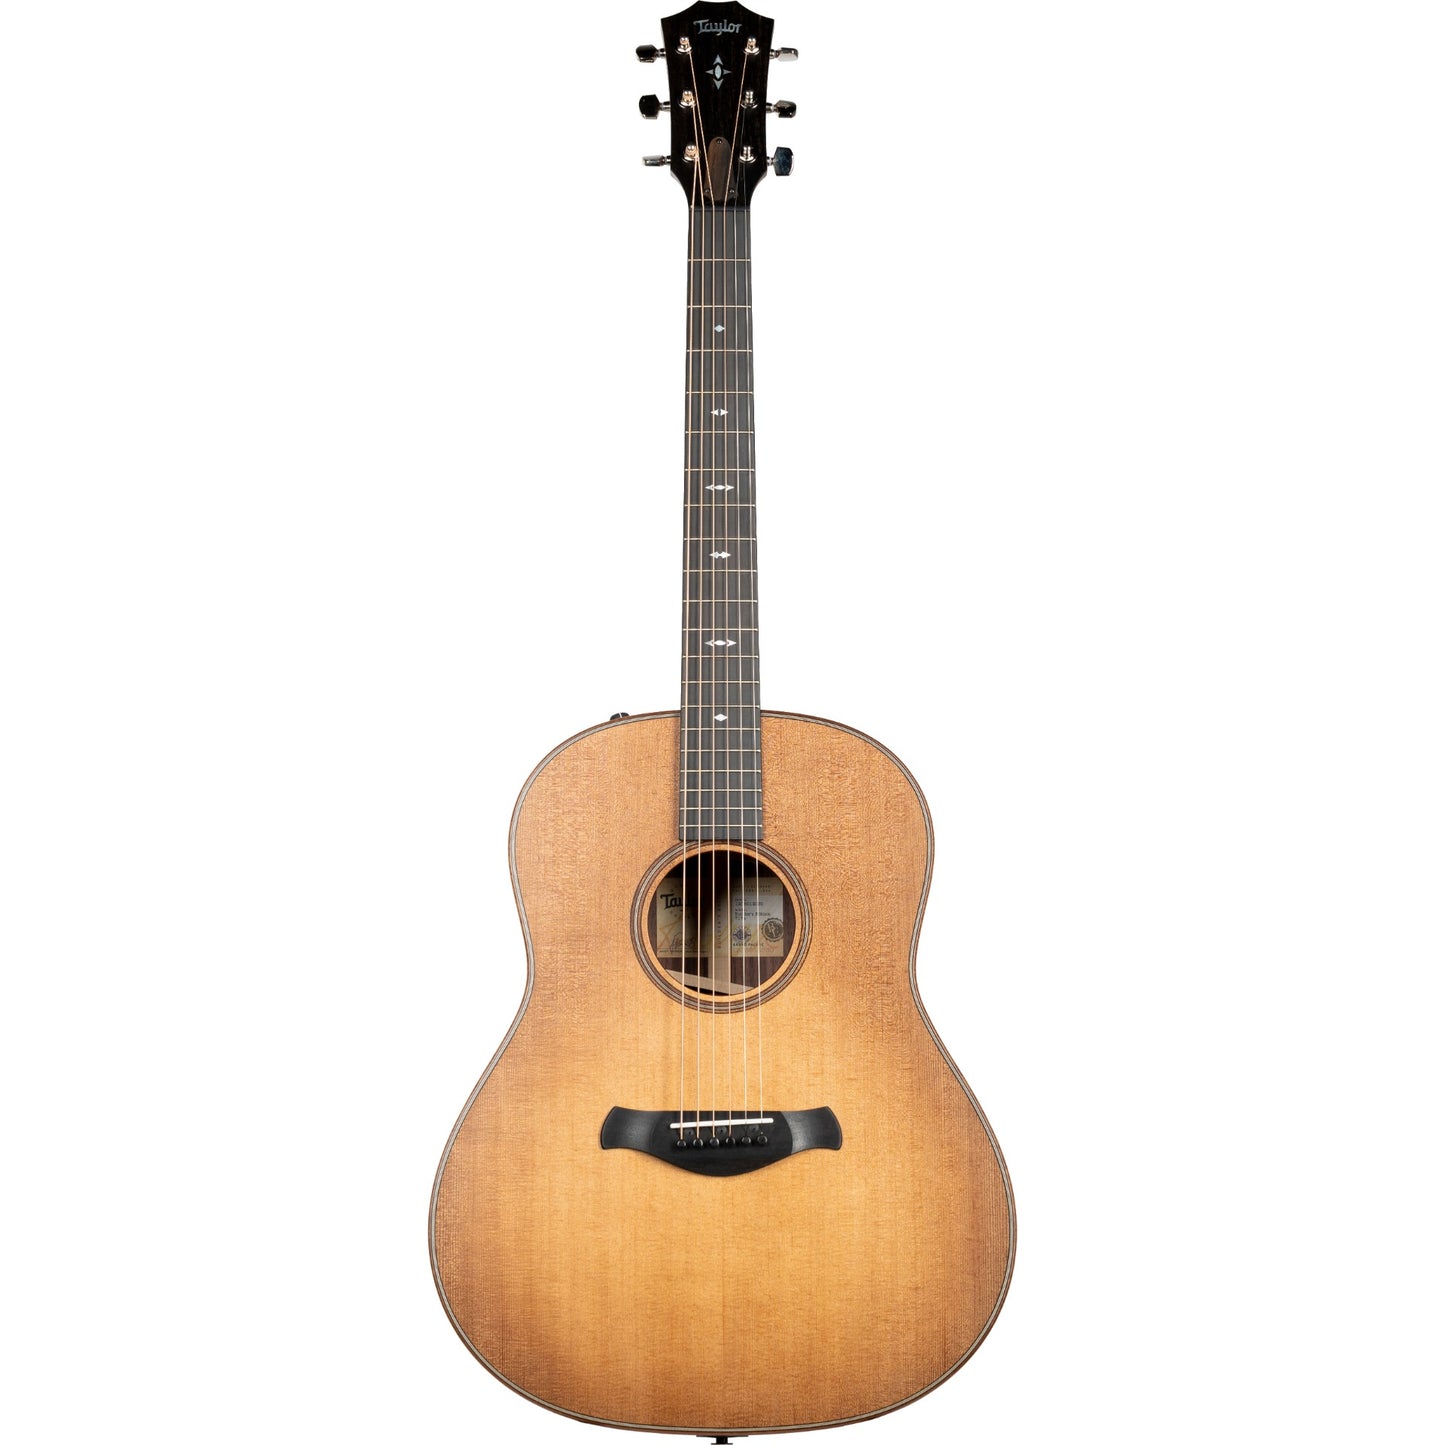 Taylor Builder’s Edition 717e Acoustic Electric Guitar in Wild Honey Burst